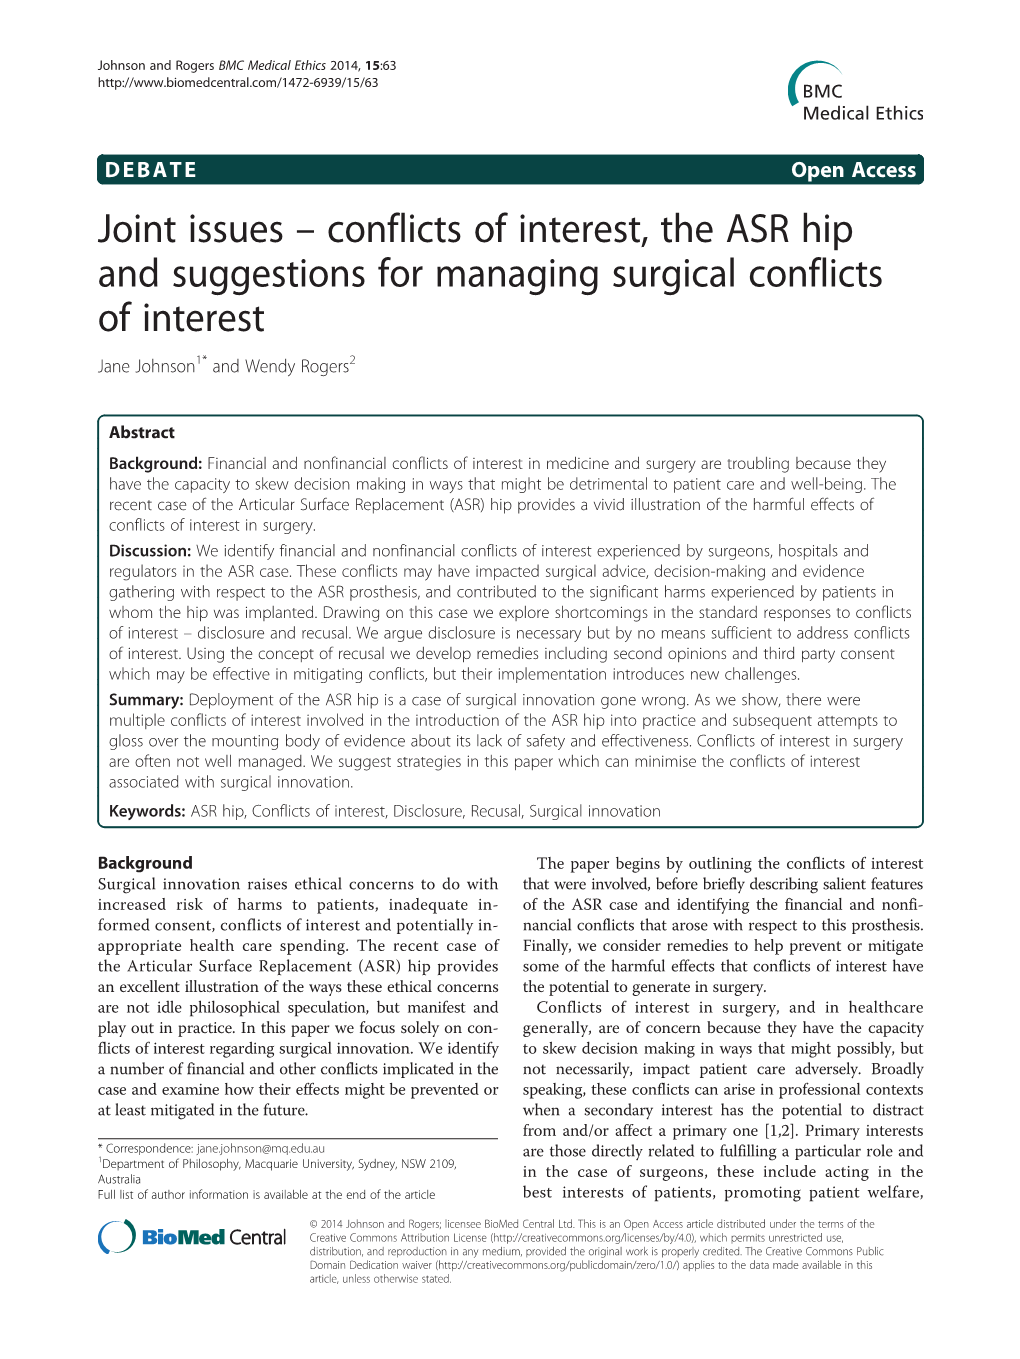 Conflicts of Interest, the ASR Hip and Suggestions for Managing Surgical Conflicts of Interest Jane Johnson1* and Wendy Rogers2